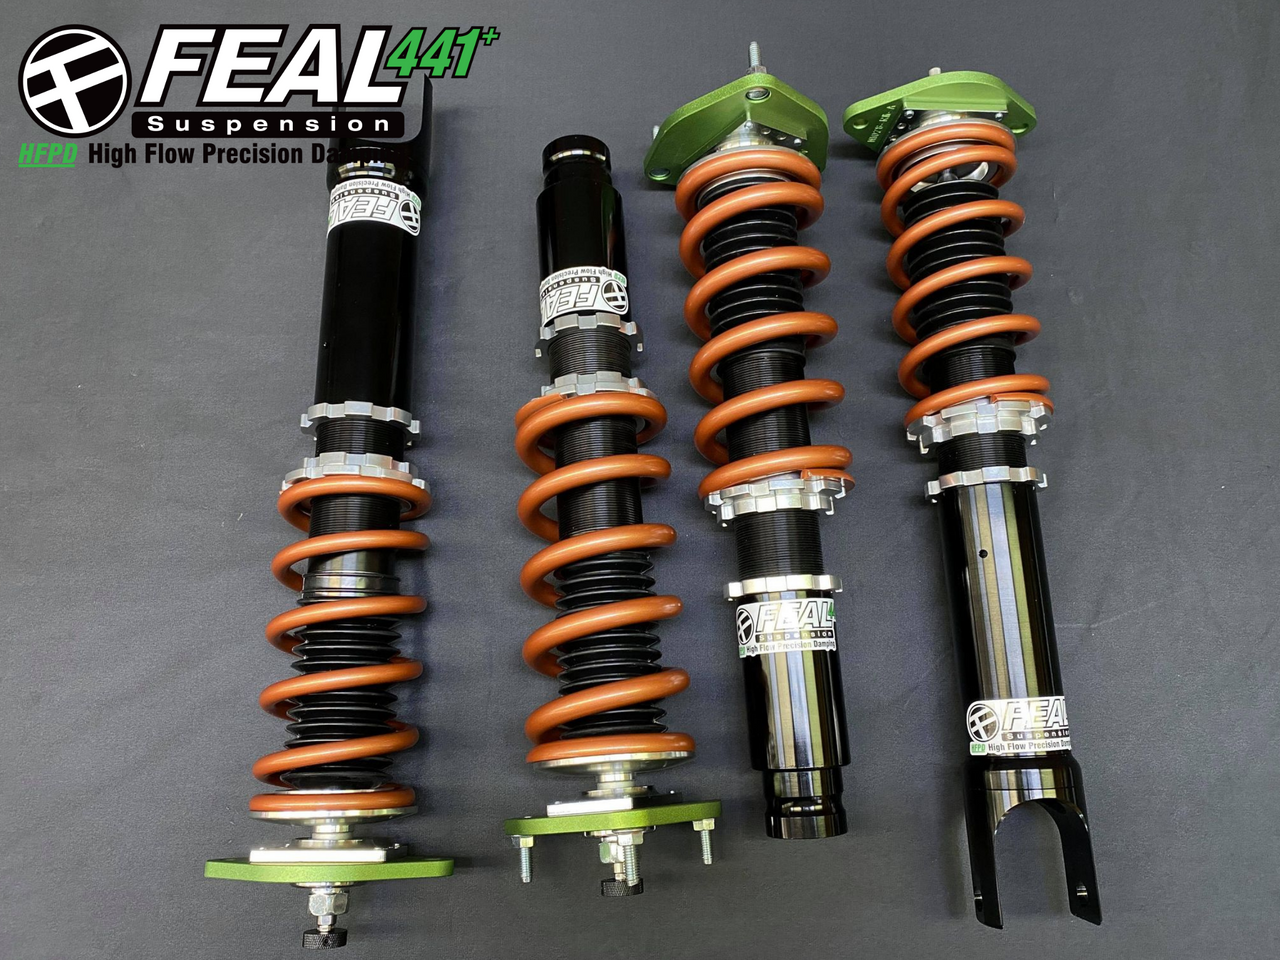 Feal Suspension 441 Coilovers - 2008 - 2013 Infiniti G37x AWD